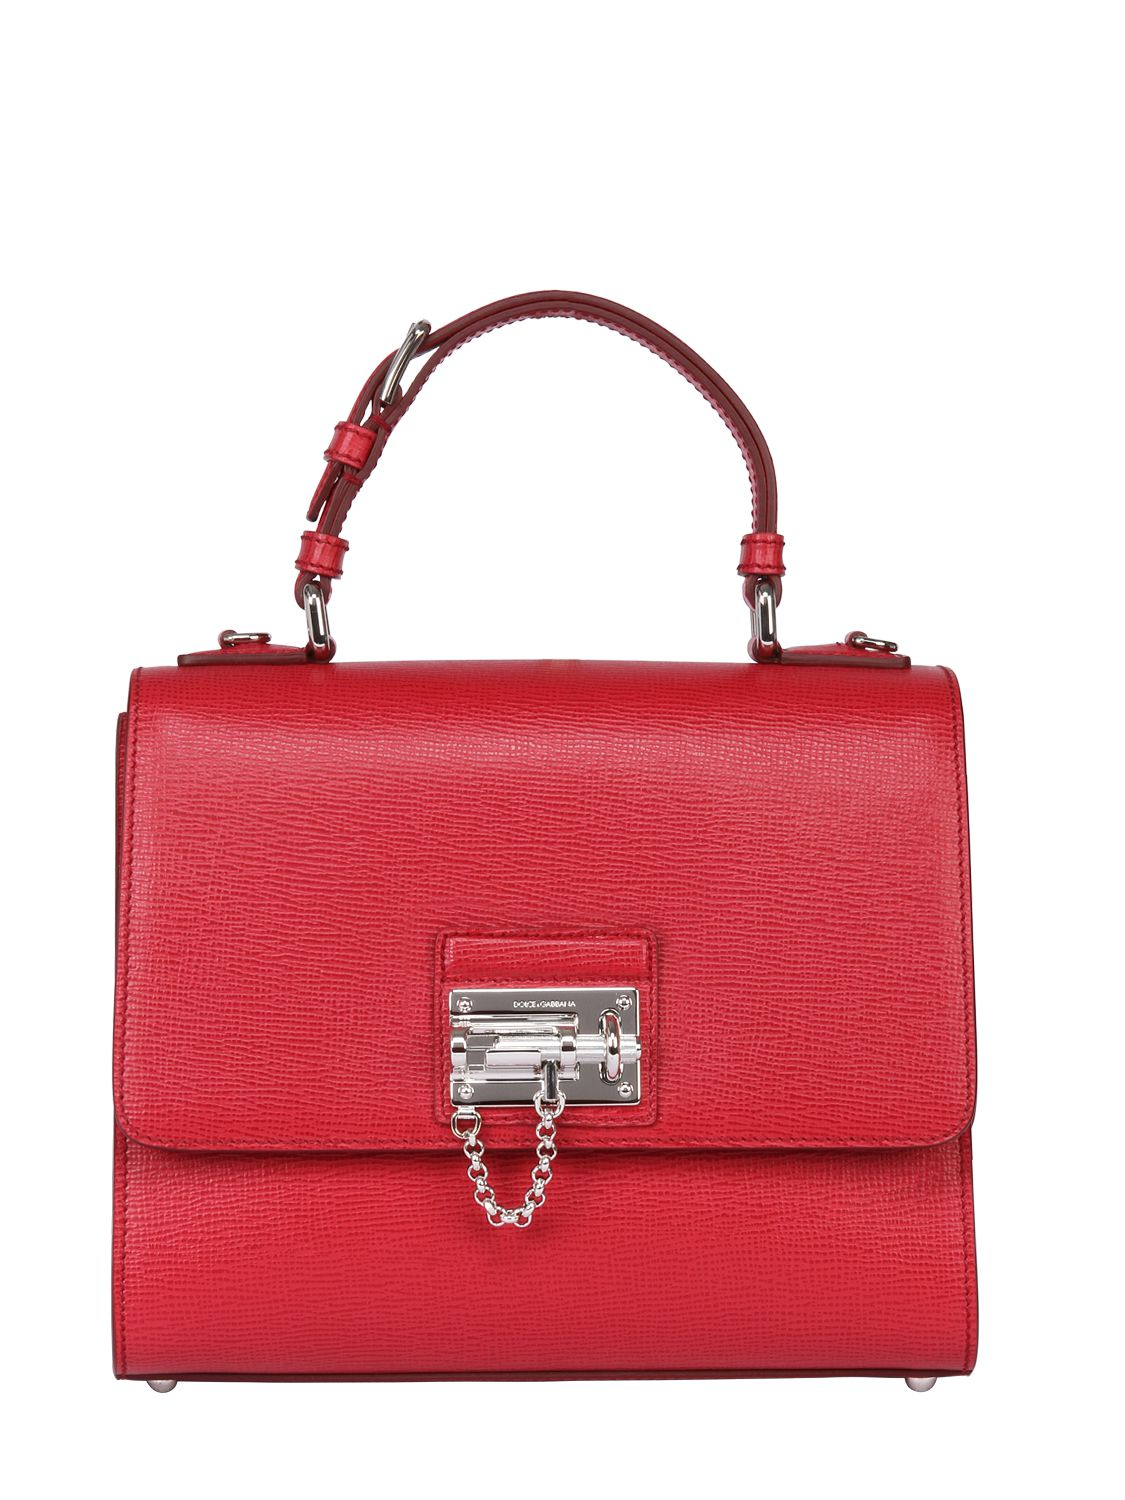 Dolce & Gabbana Monica Embossed Leather Top Handle Bag in Red - Lyst